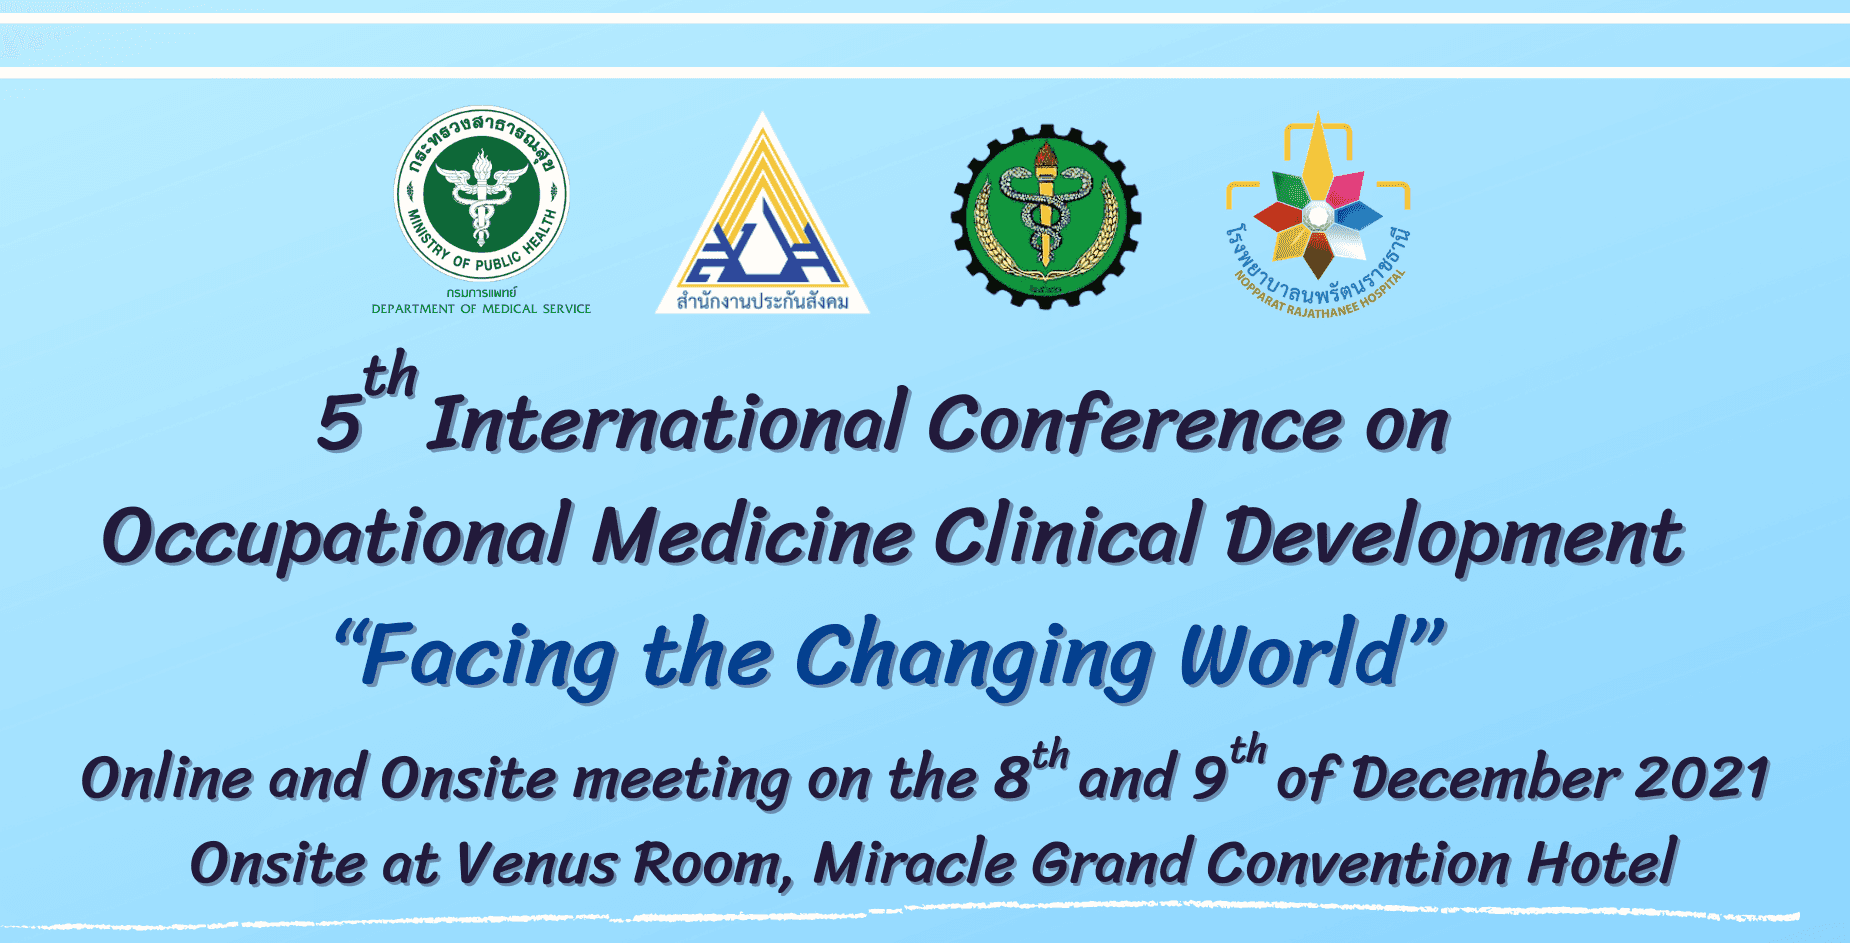 Facing the Changing World, the 5th International meeting on Occupational Medicine